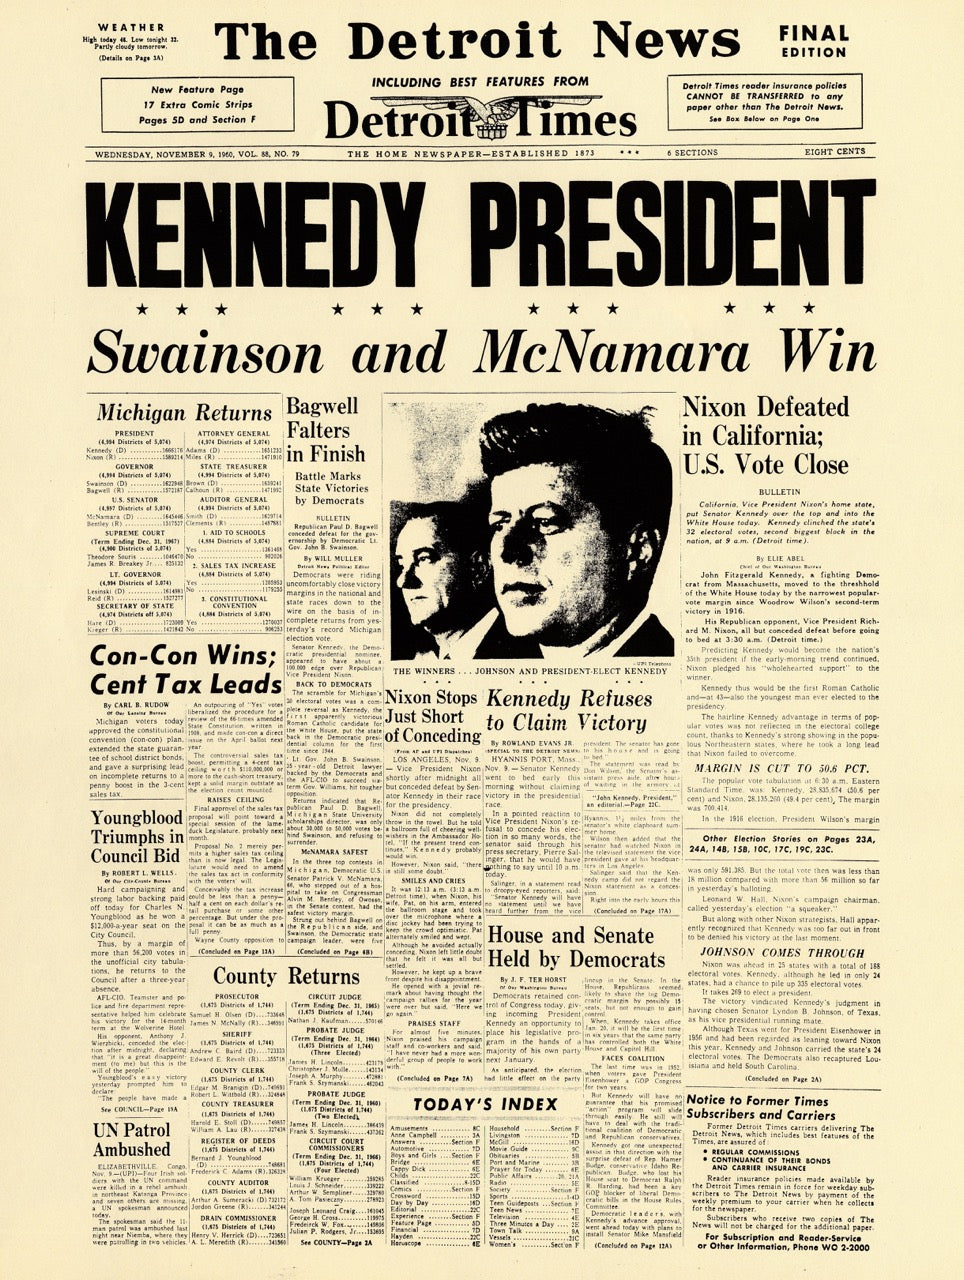 Front Pages- Kennedy President